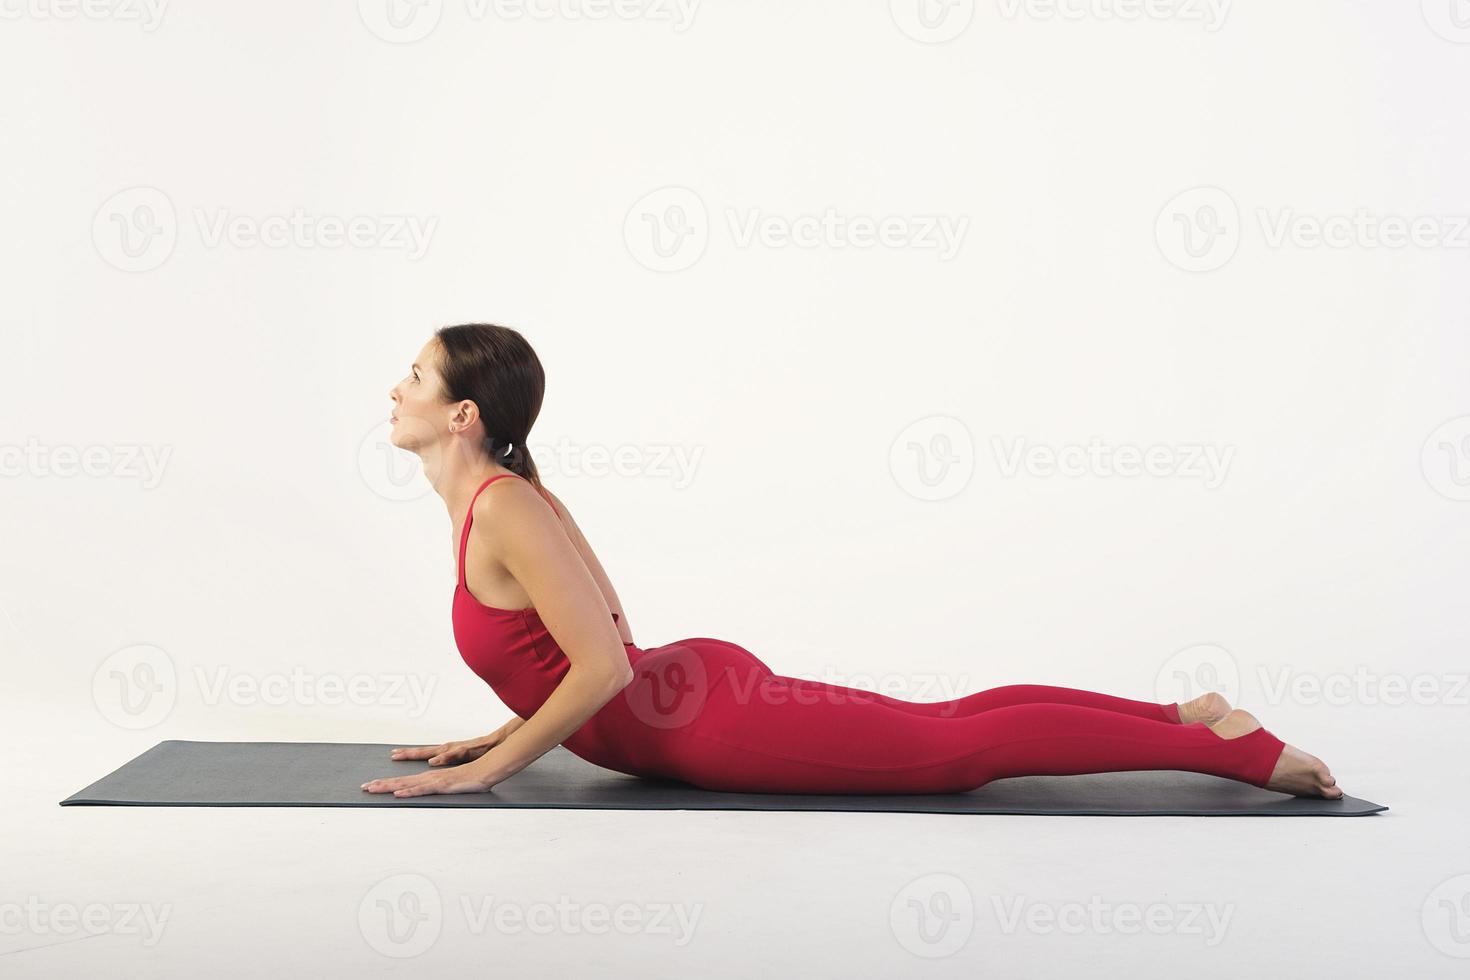 a charming girl demonstrates stretching and yoga asanas in a photo studio